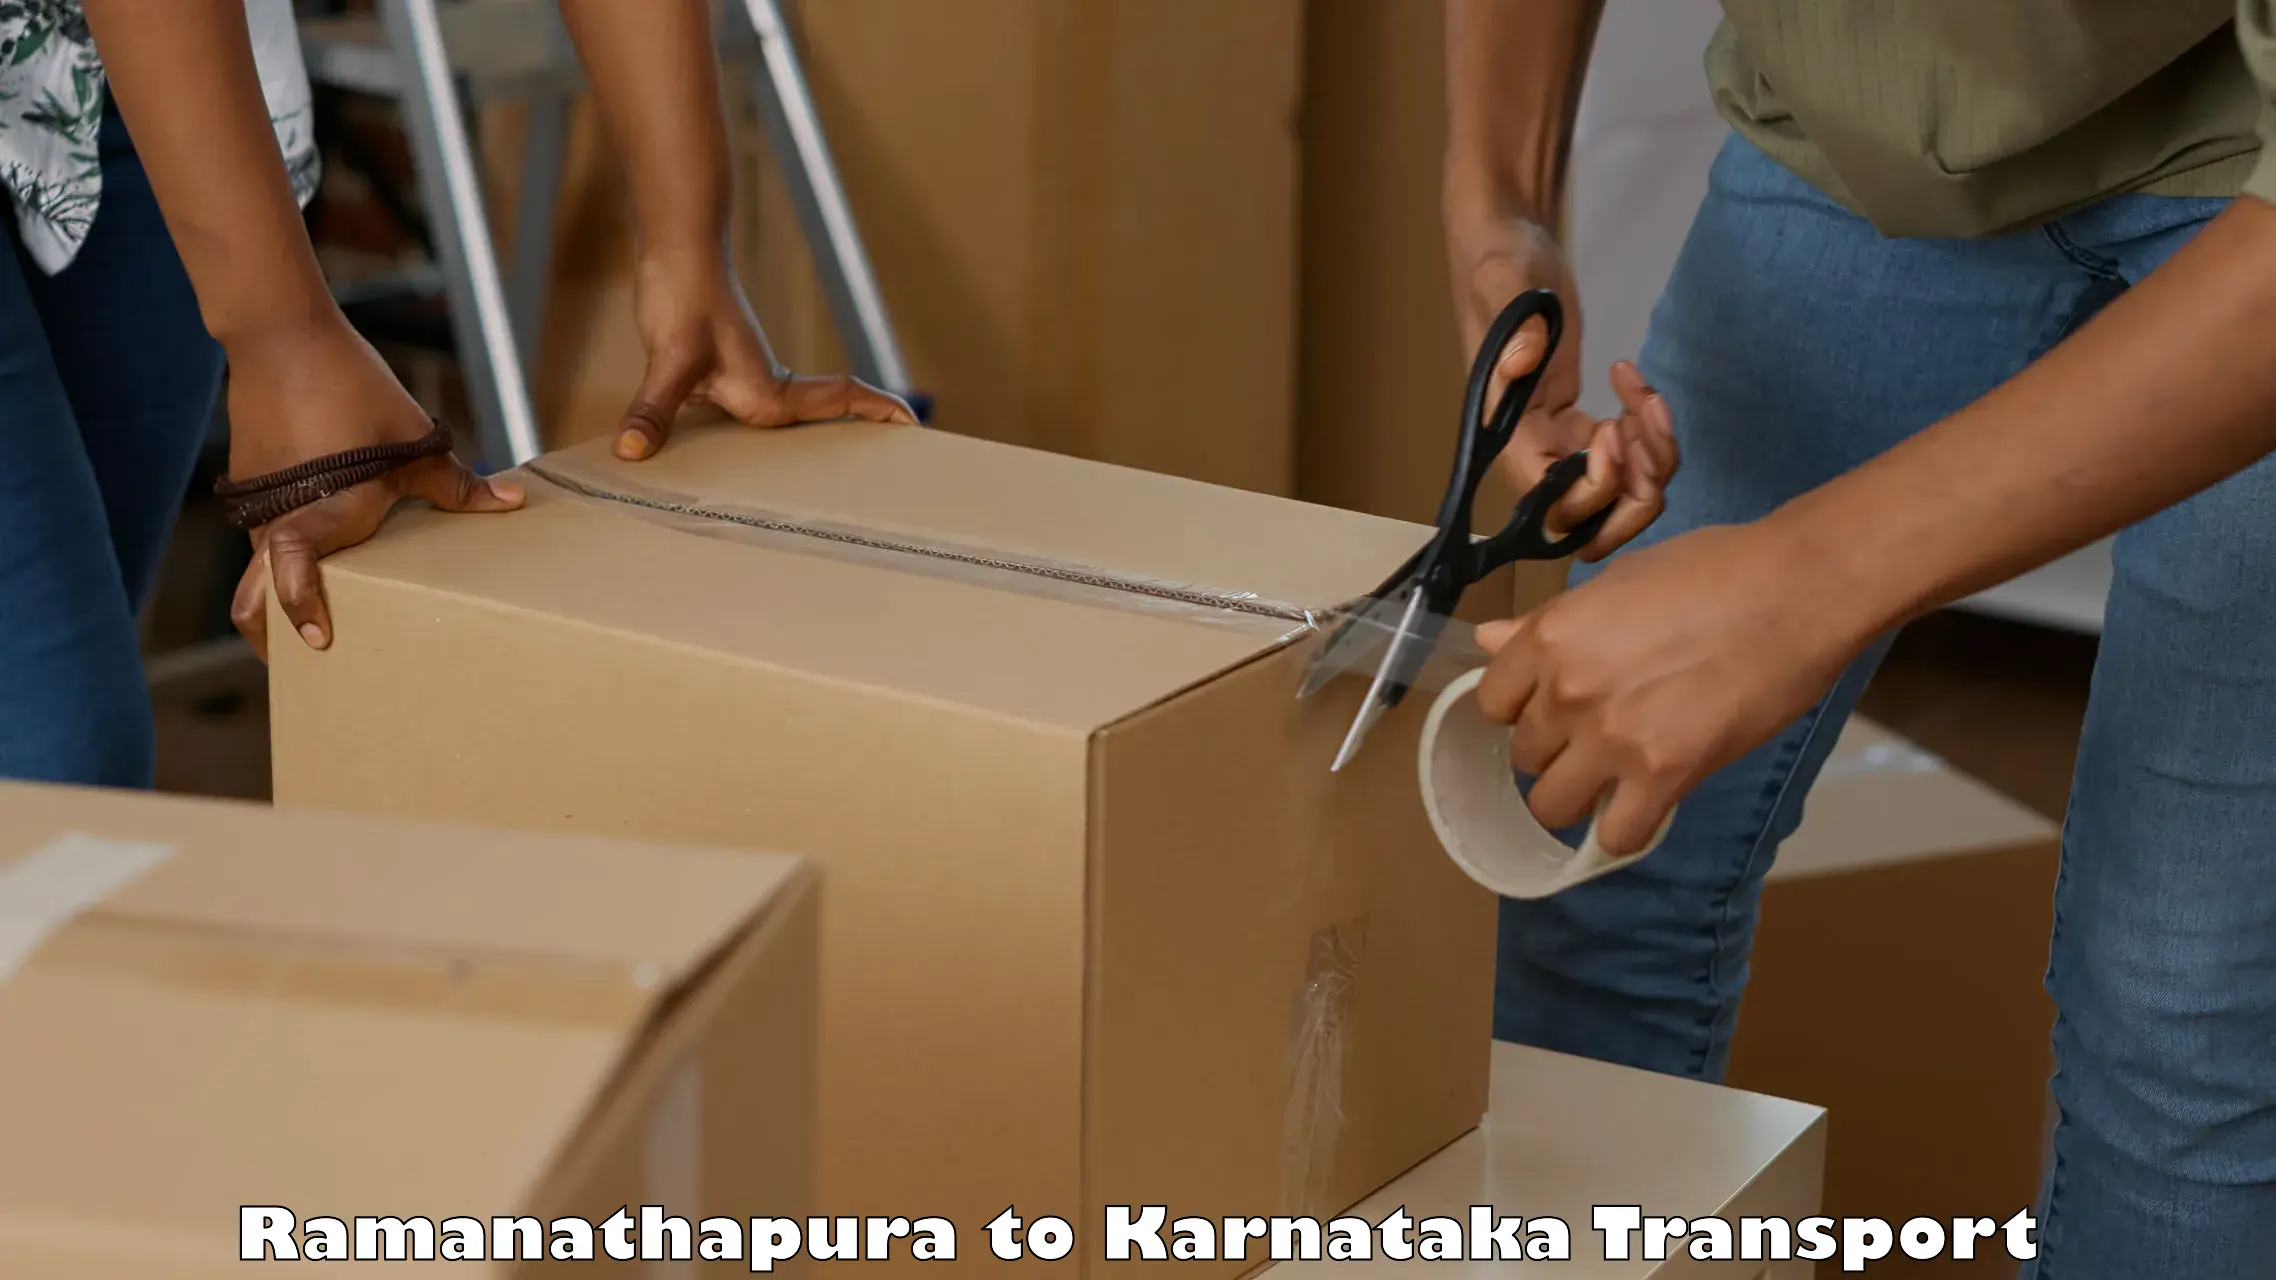 India truck logistics services in Ramanathapura to Manipal Academy of Higher Education